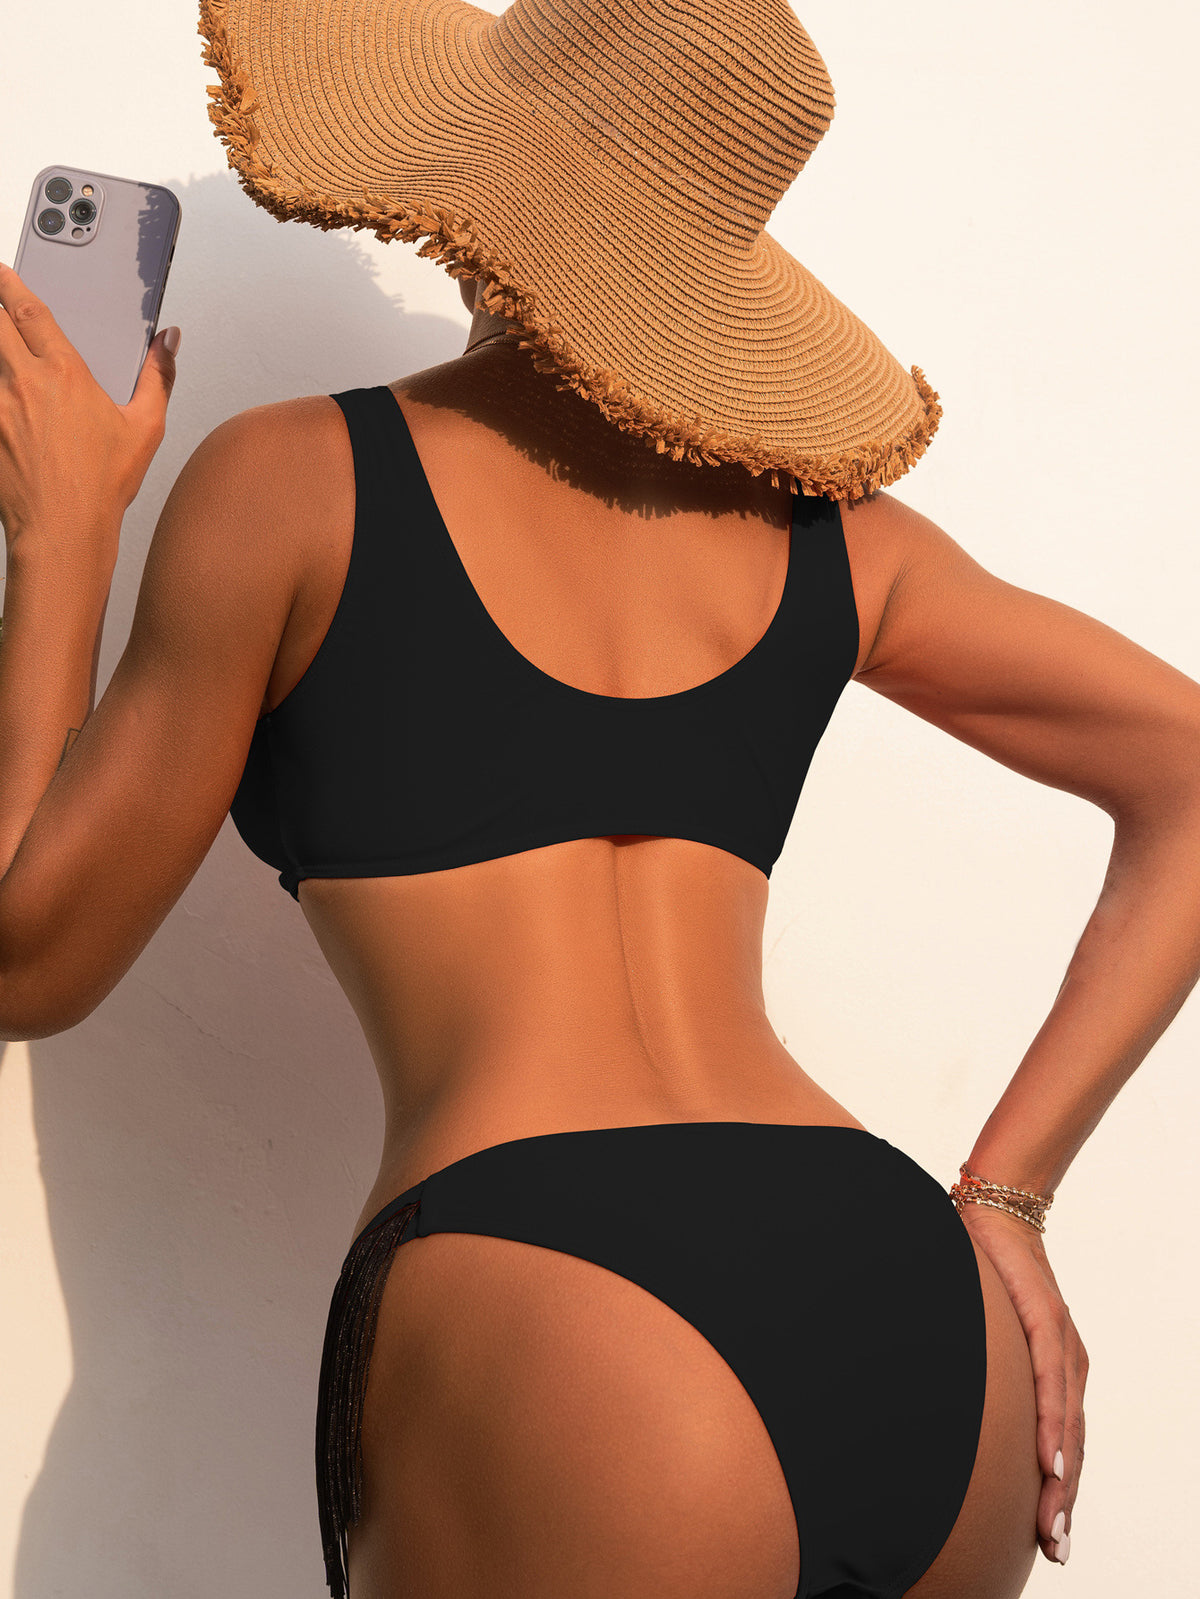 Tina's Strapped Tassel One Piece Swimsuit